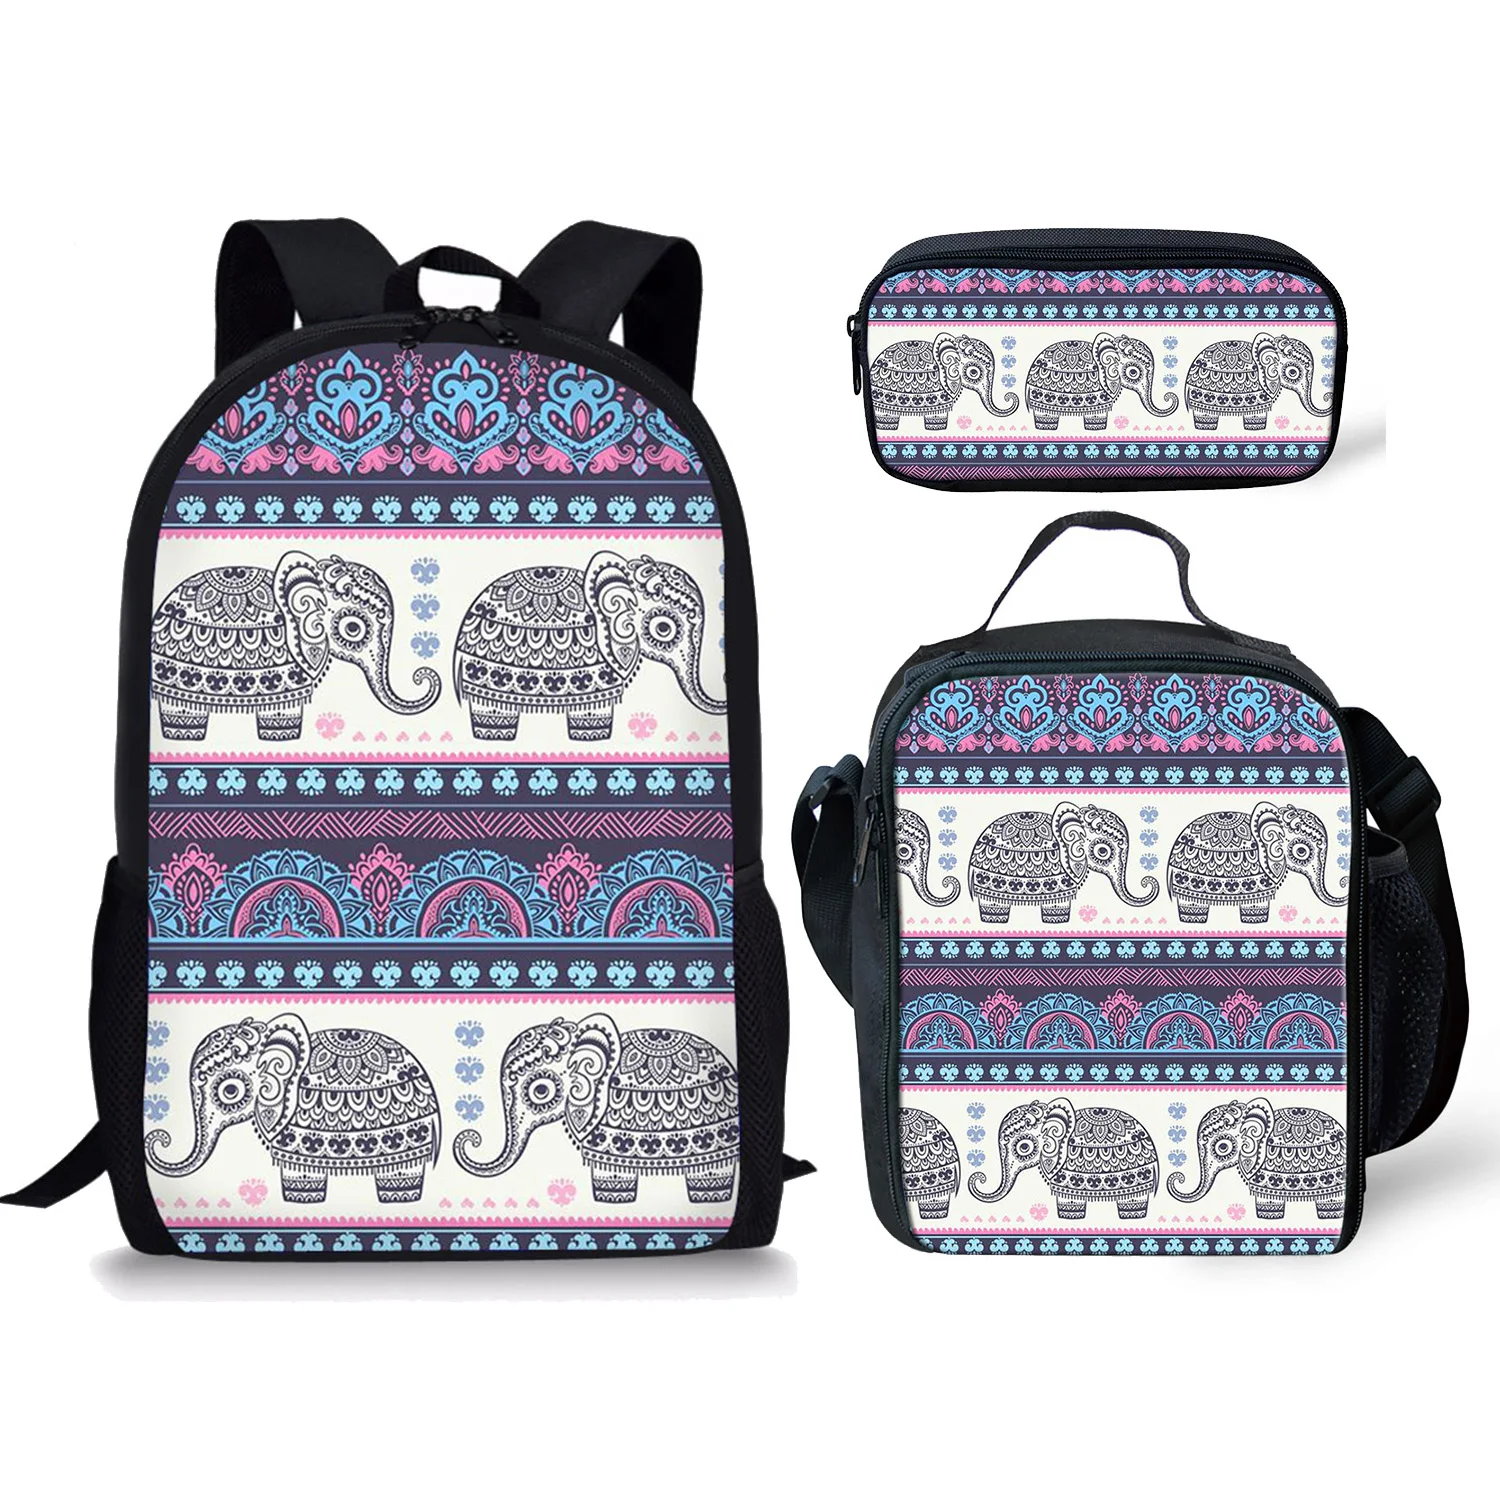 Ethnic Elephant Pattern School Bags Girls 3pcs Pencil Cases Lunch Food Children's Backpack Retro Student Rucksack Free Shipping